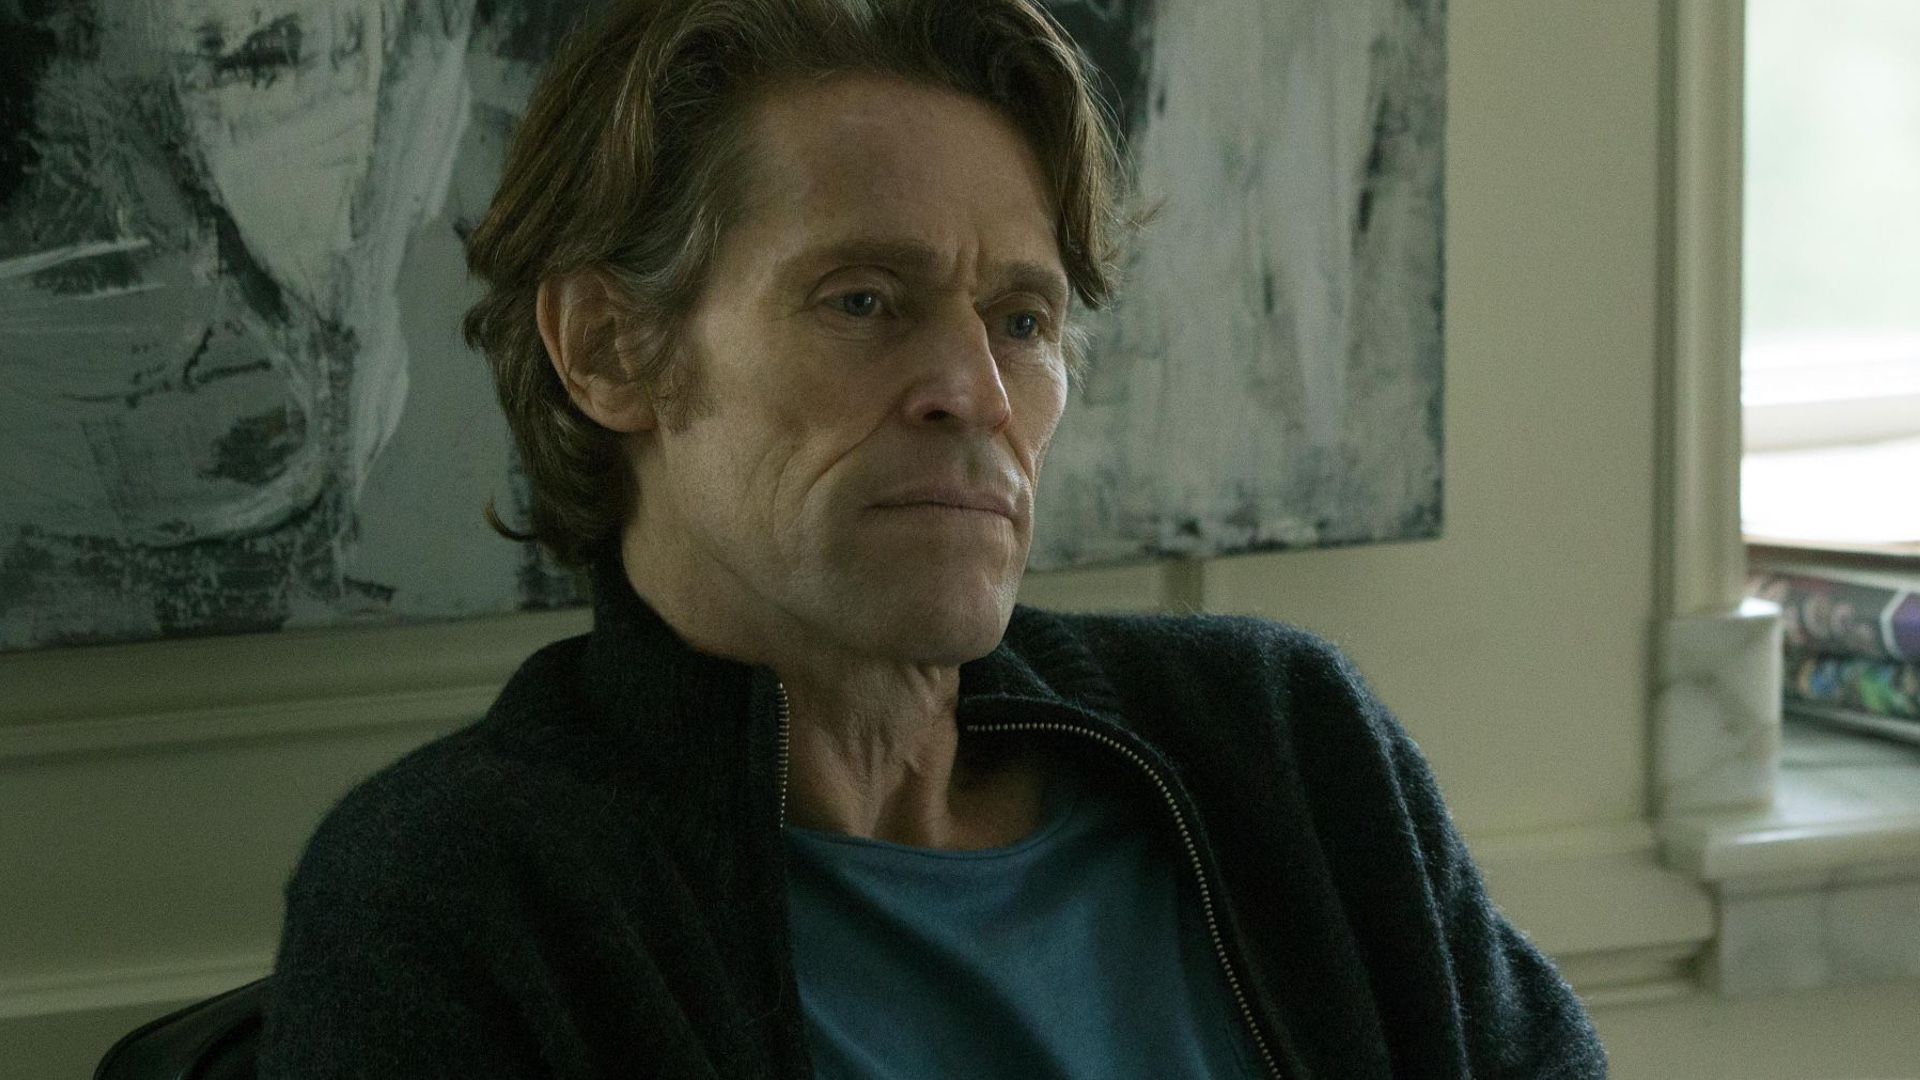 At Eternity's Gate Starring Willem Dafoe To Close Out The New York